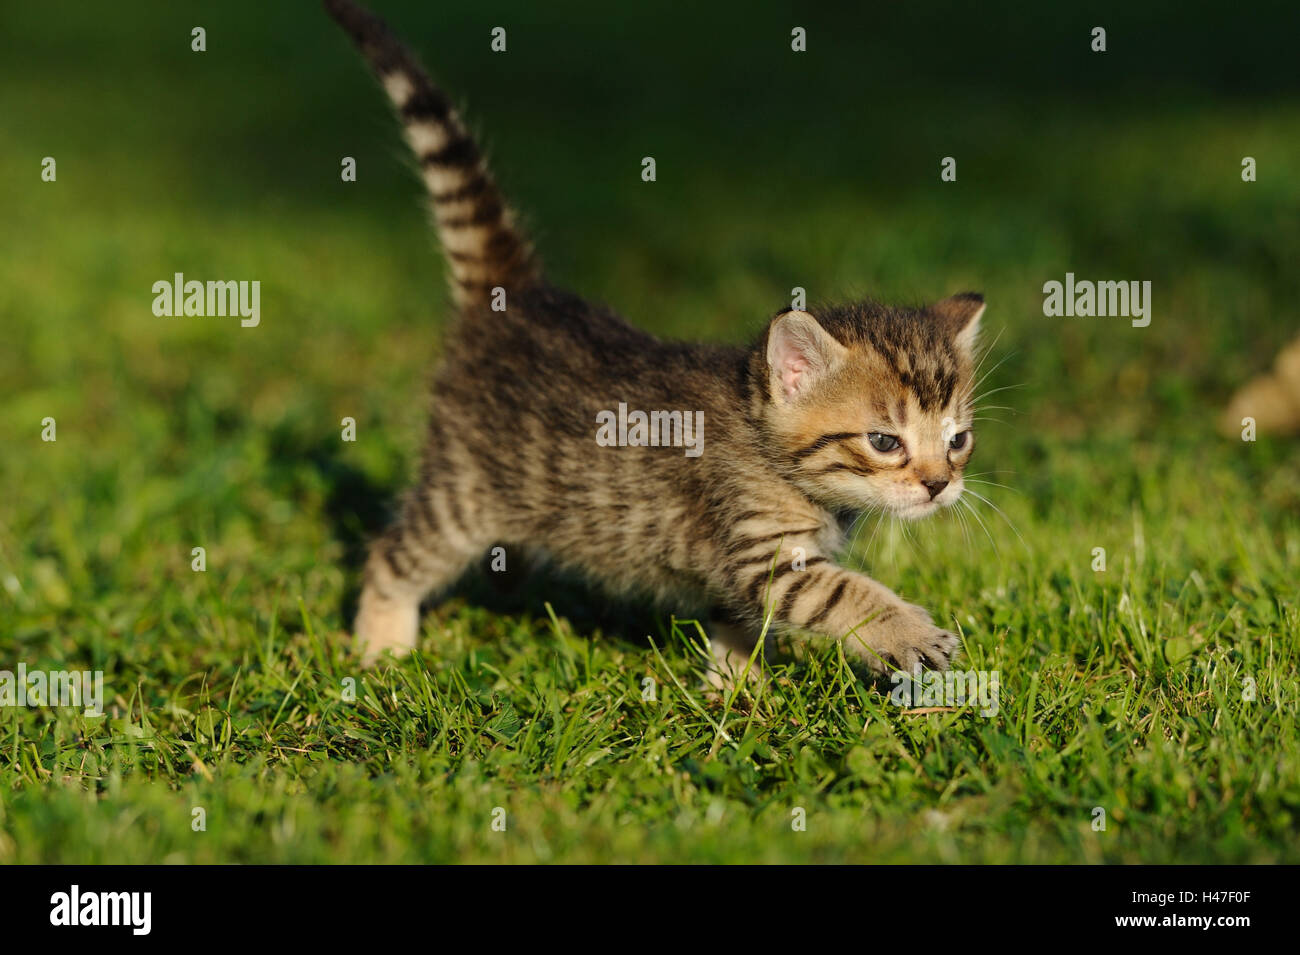 House kittens, Felis silvestris catus, young animal, striped, meadow, side view, go, Stock Photo